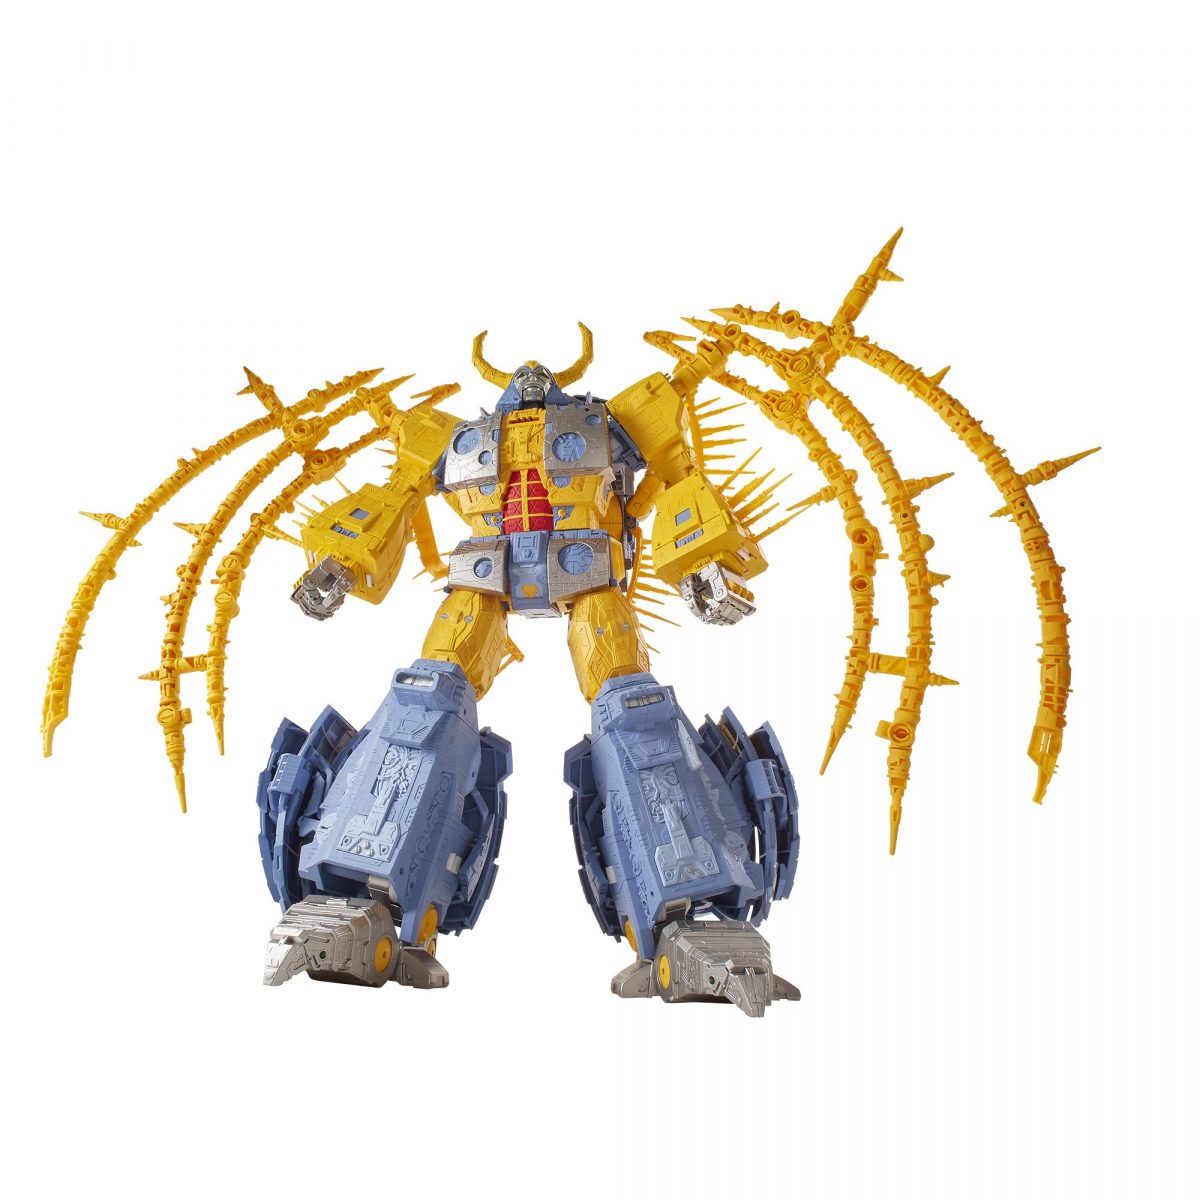 Top 20 Most Valuable Transformers Toys 